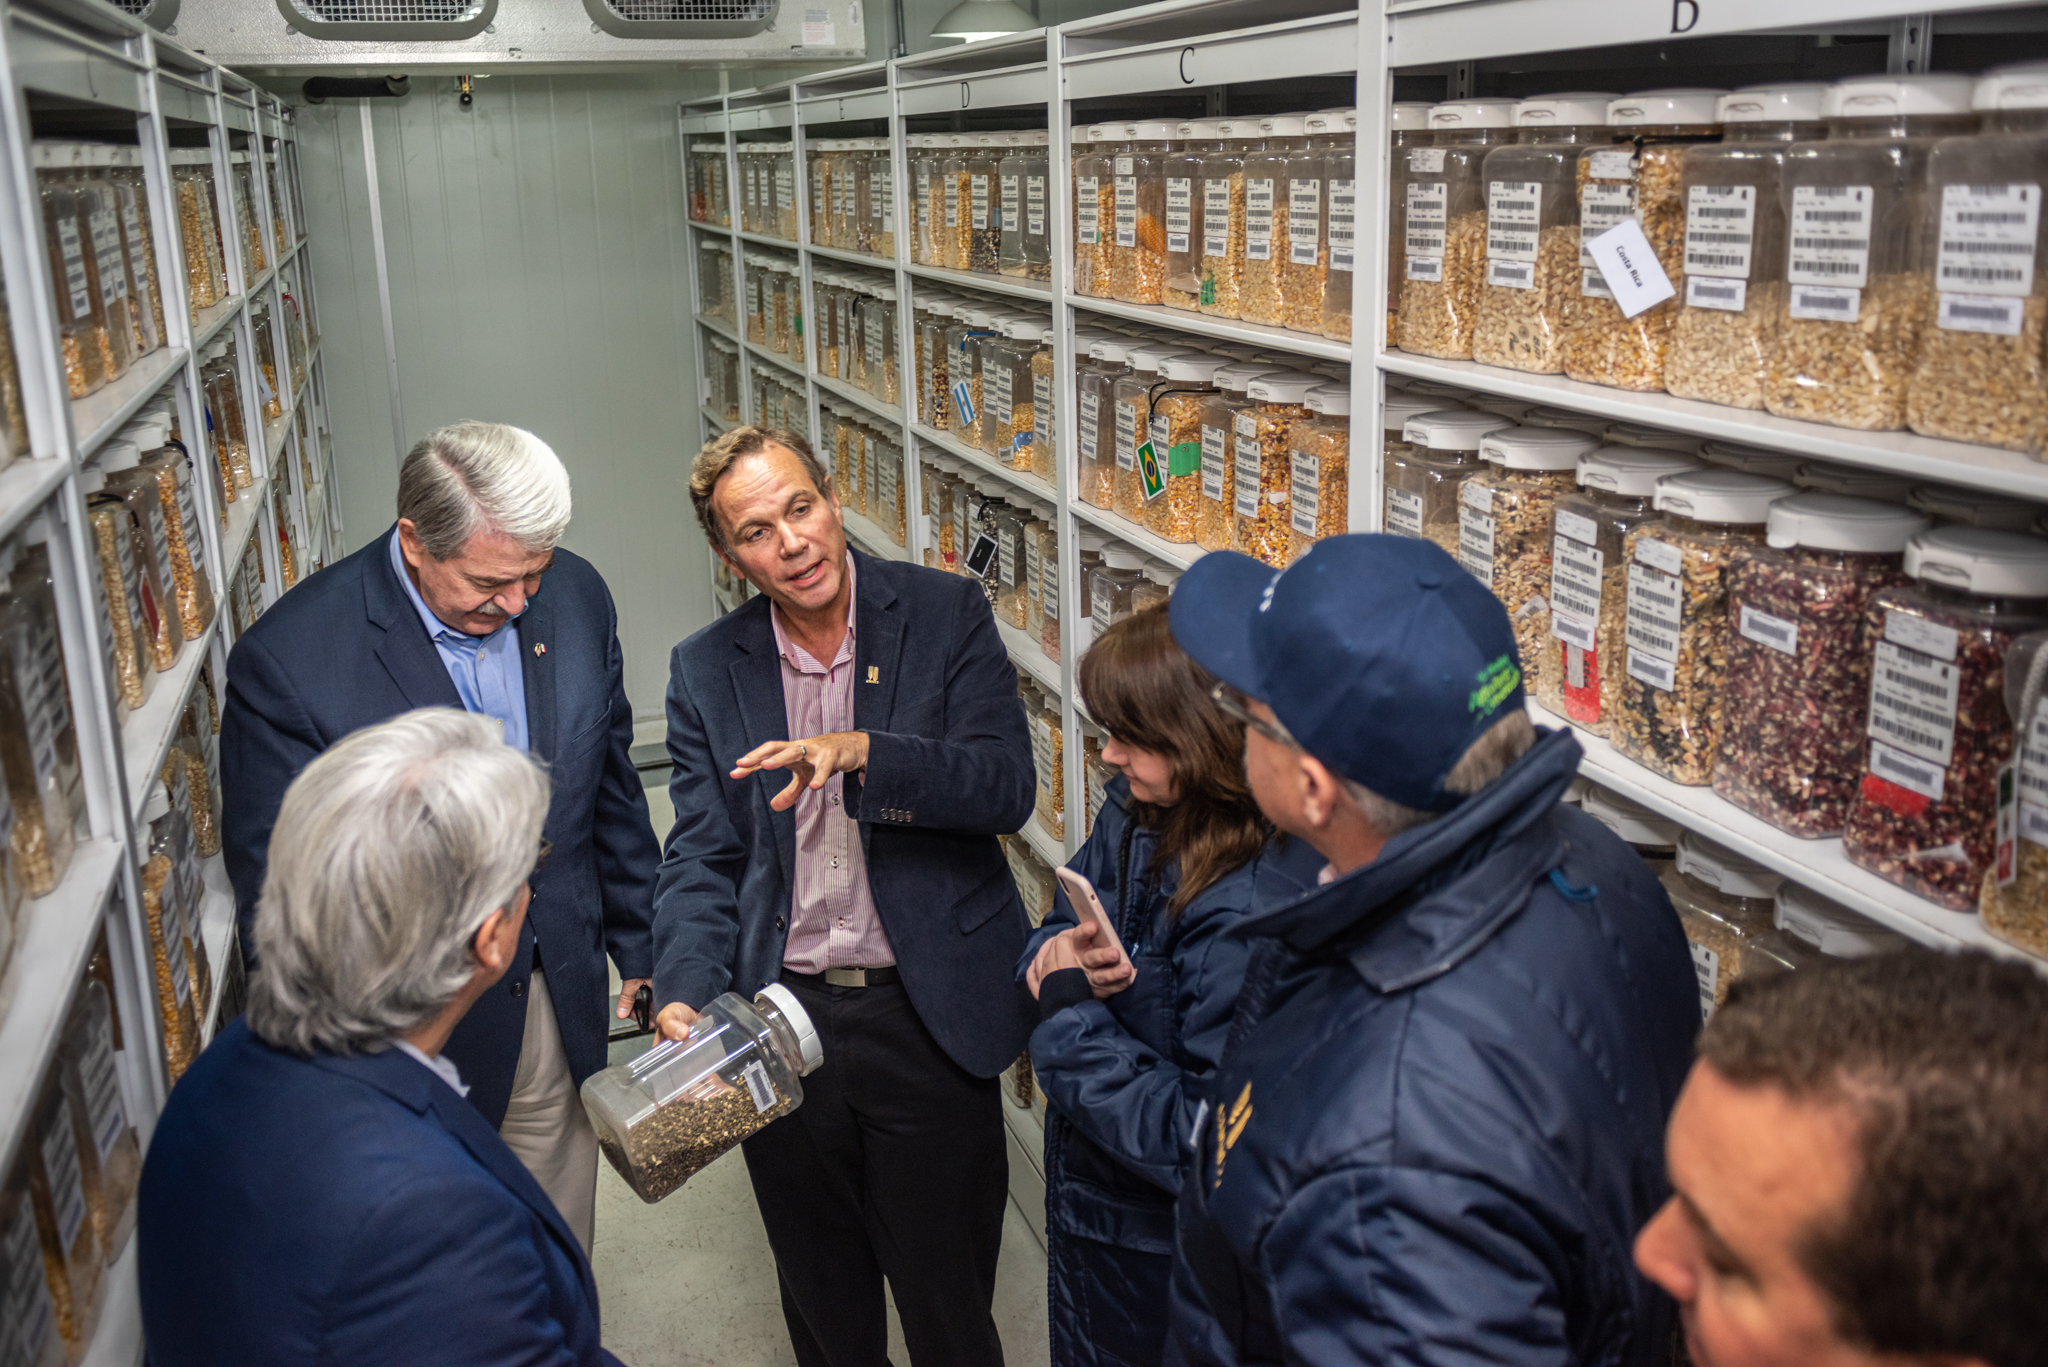 The director of the Genetic Resources program, Kevin Pixley (center), shows some of the genetic materials at CIMMYT's Germplasm Bank to US Under Secretary McKinney (top-left). (Photo: Eleusis Llanderal/CIMMYT)